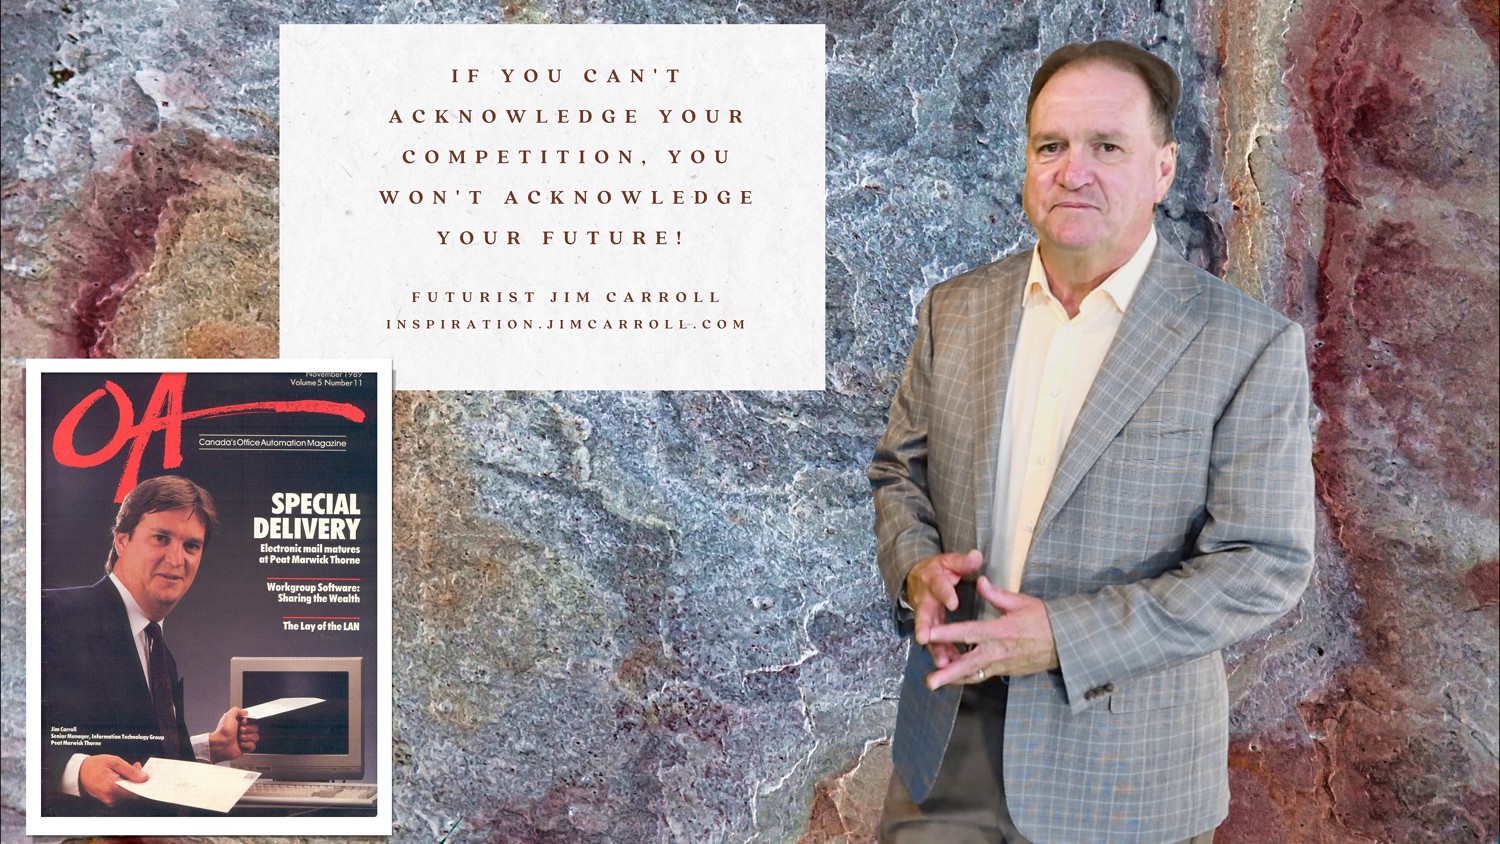 "If you can't acknowledge your competition, you won't acknowledge your future!" - Futurist Jim Carroll